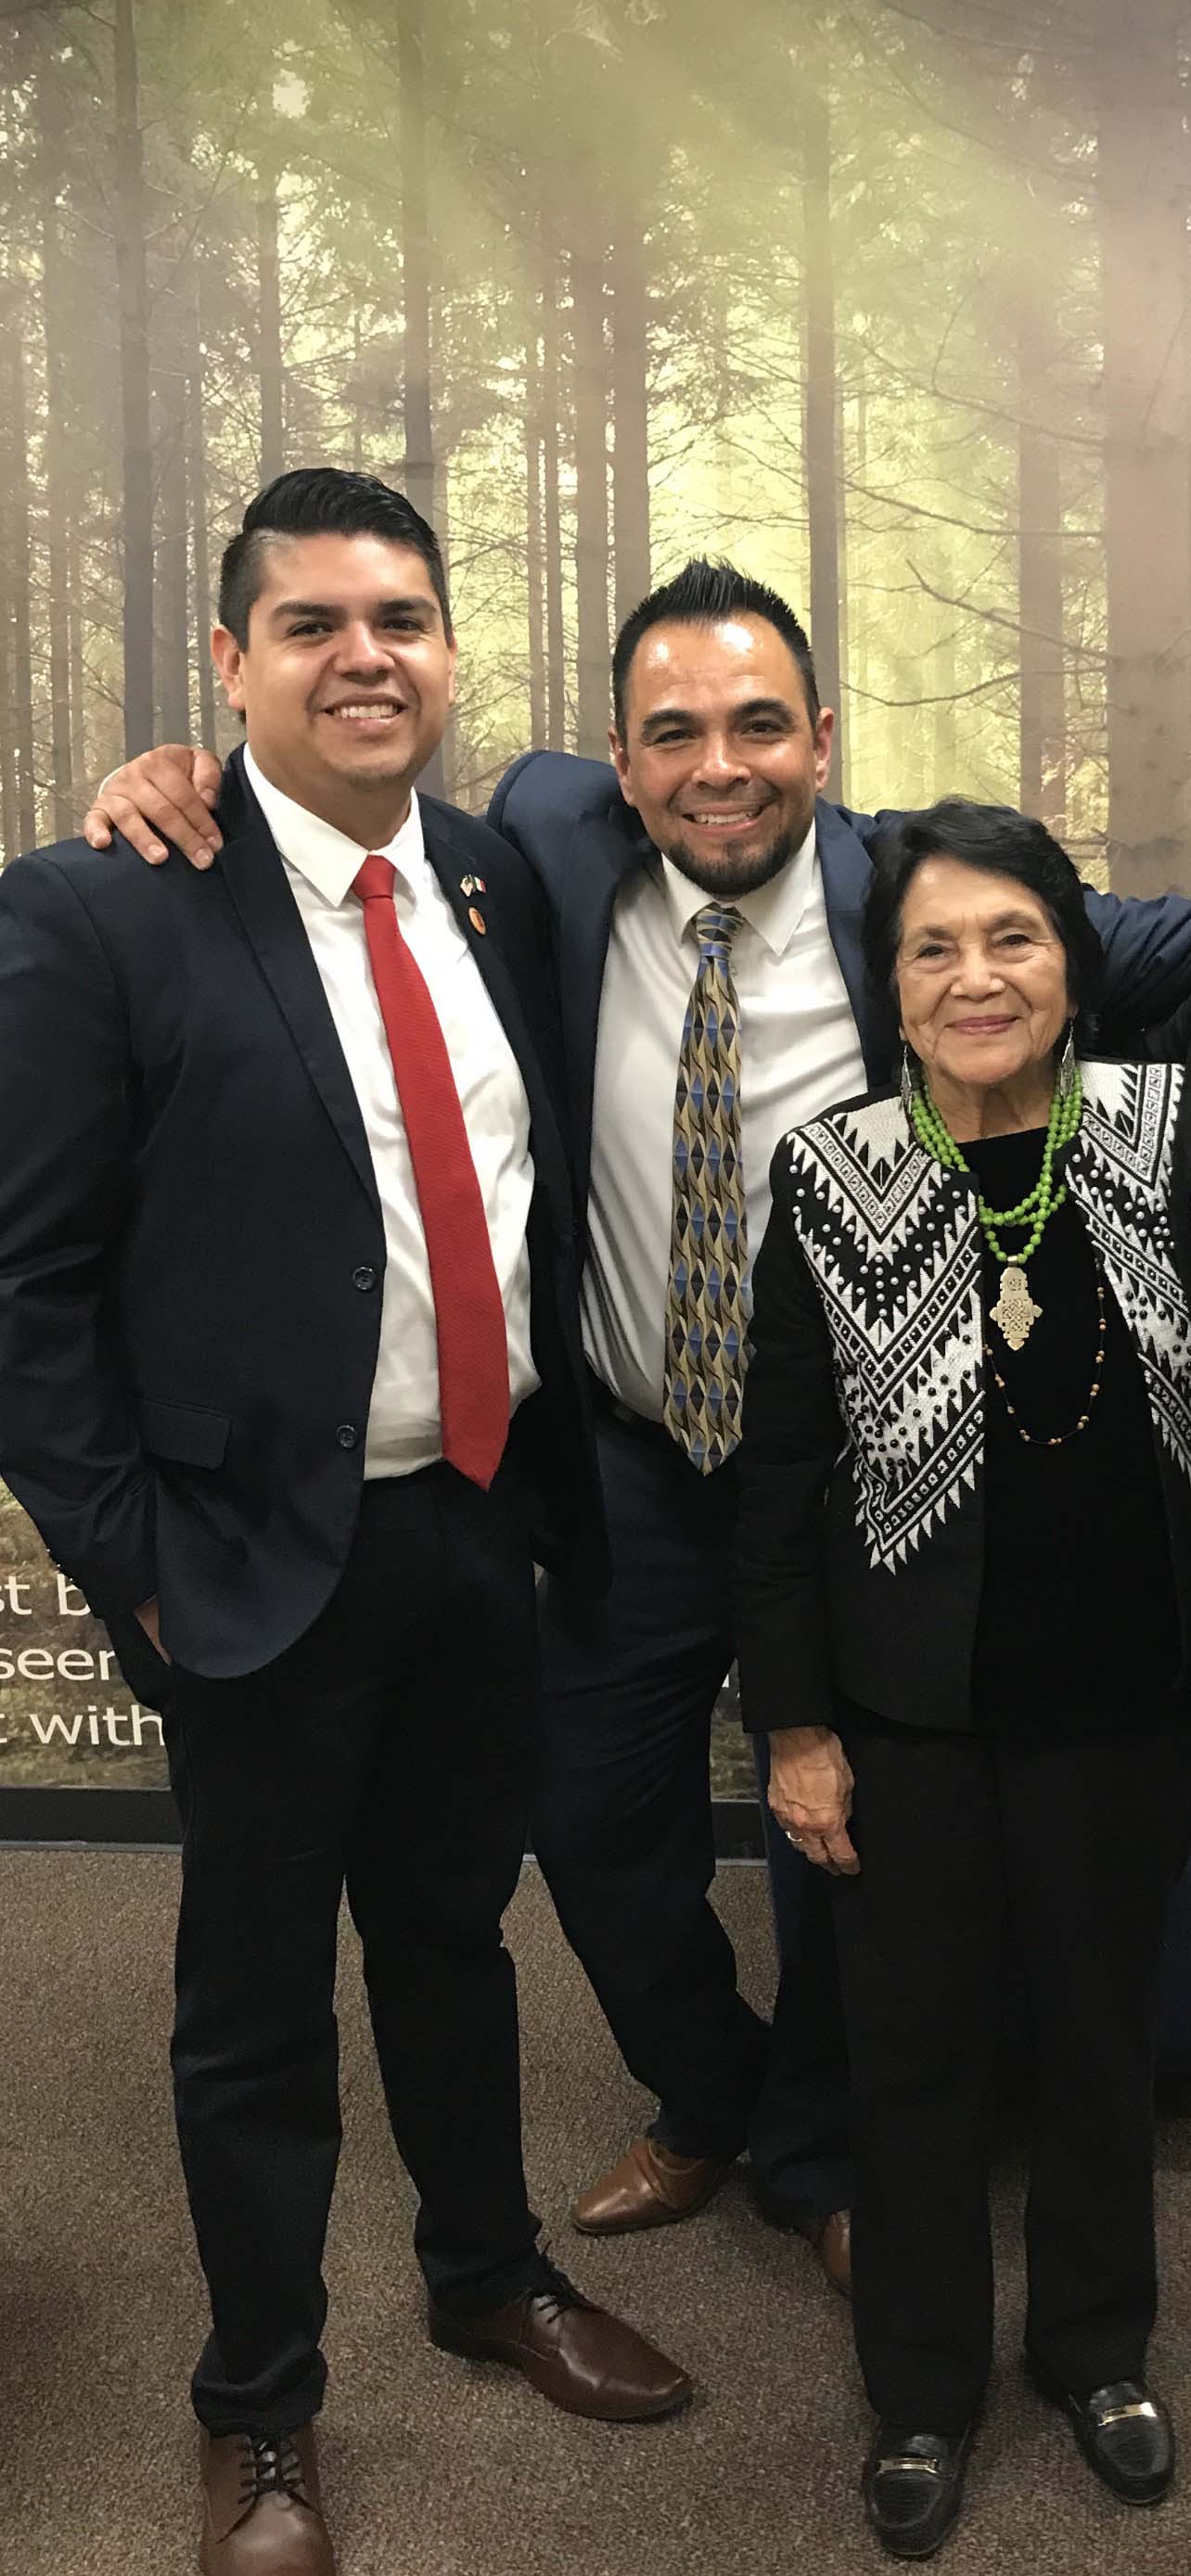 From left: Alfredo Barcenas  and Jesse Felix with Dolores Huerta, civil rights activist and co-founder of the United Farmworkers Union.